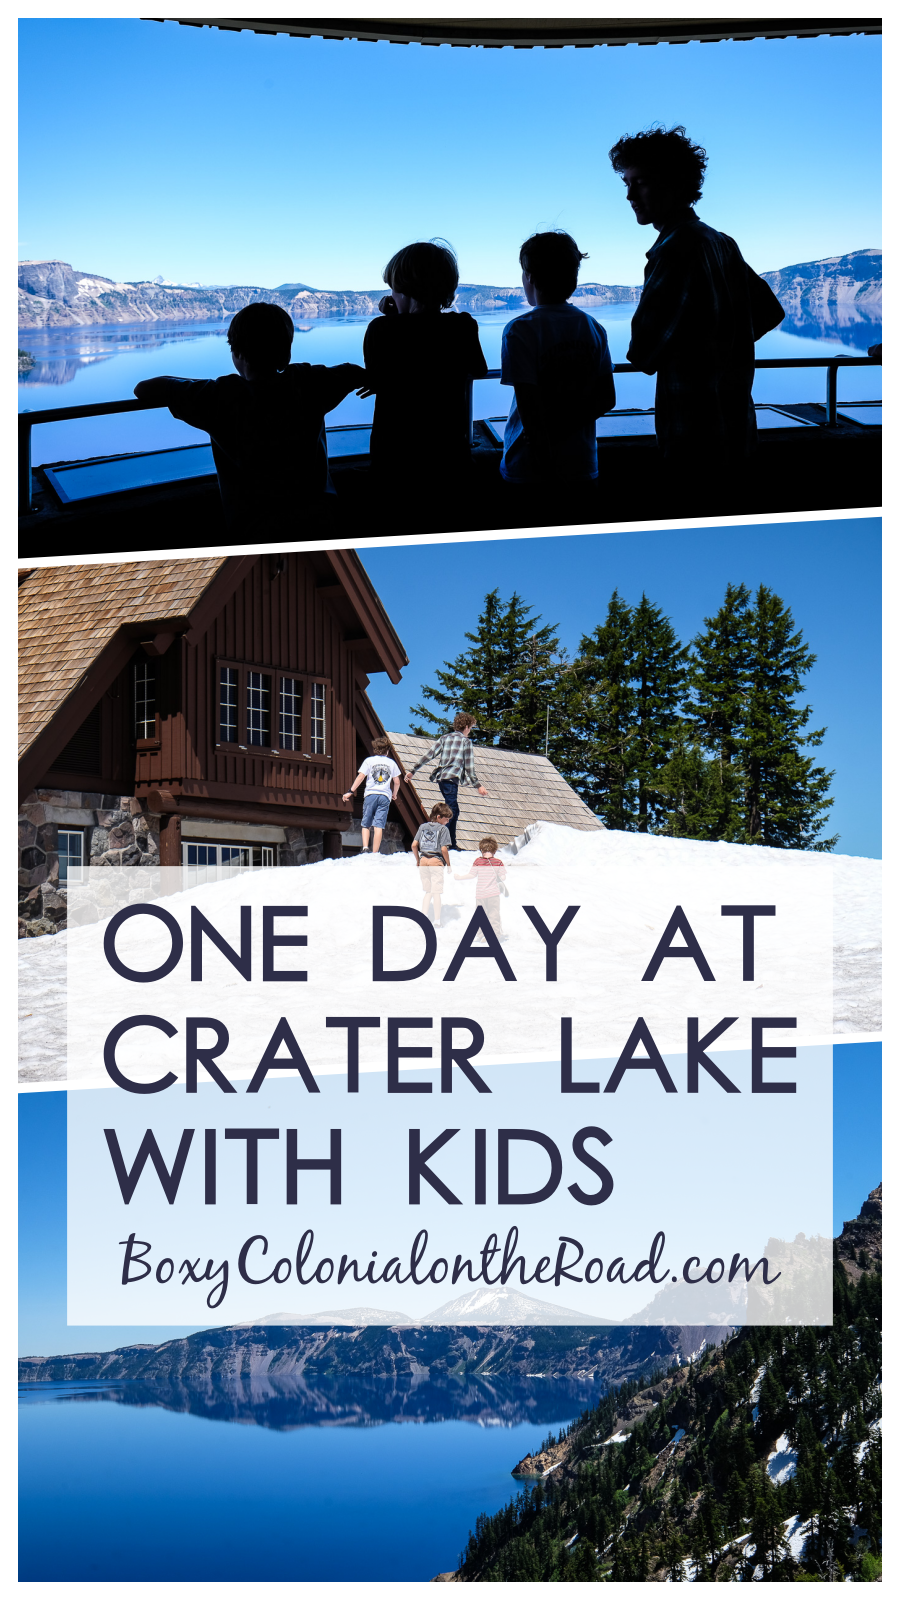 What to see with one day in Crater Lake National Park with kids #familytravel #rvtravel #nationalparks #nps